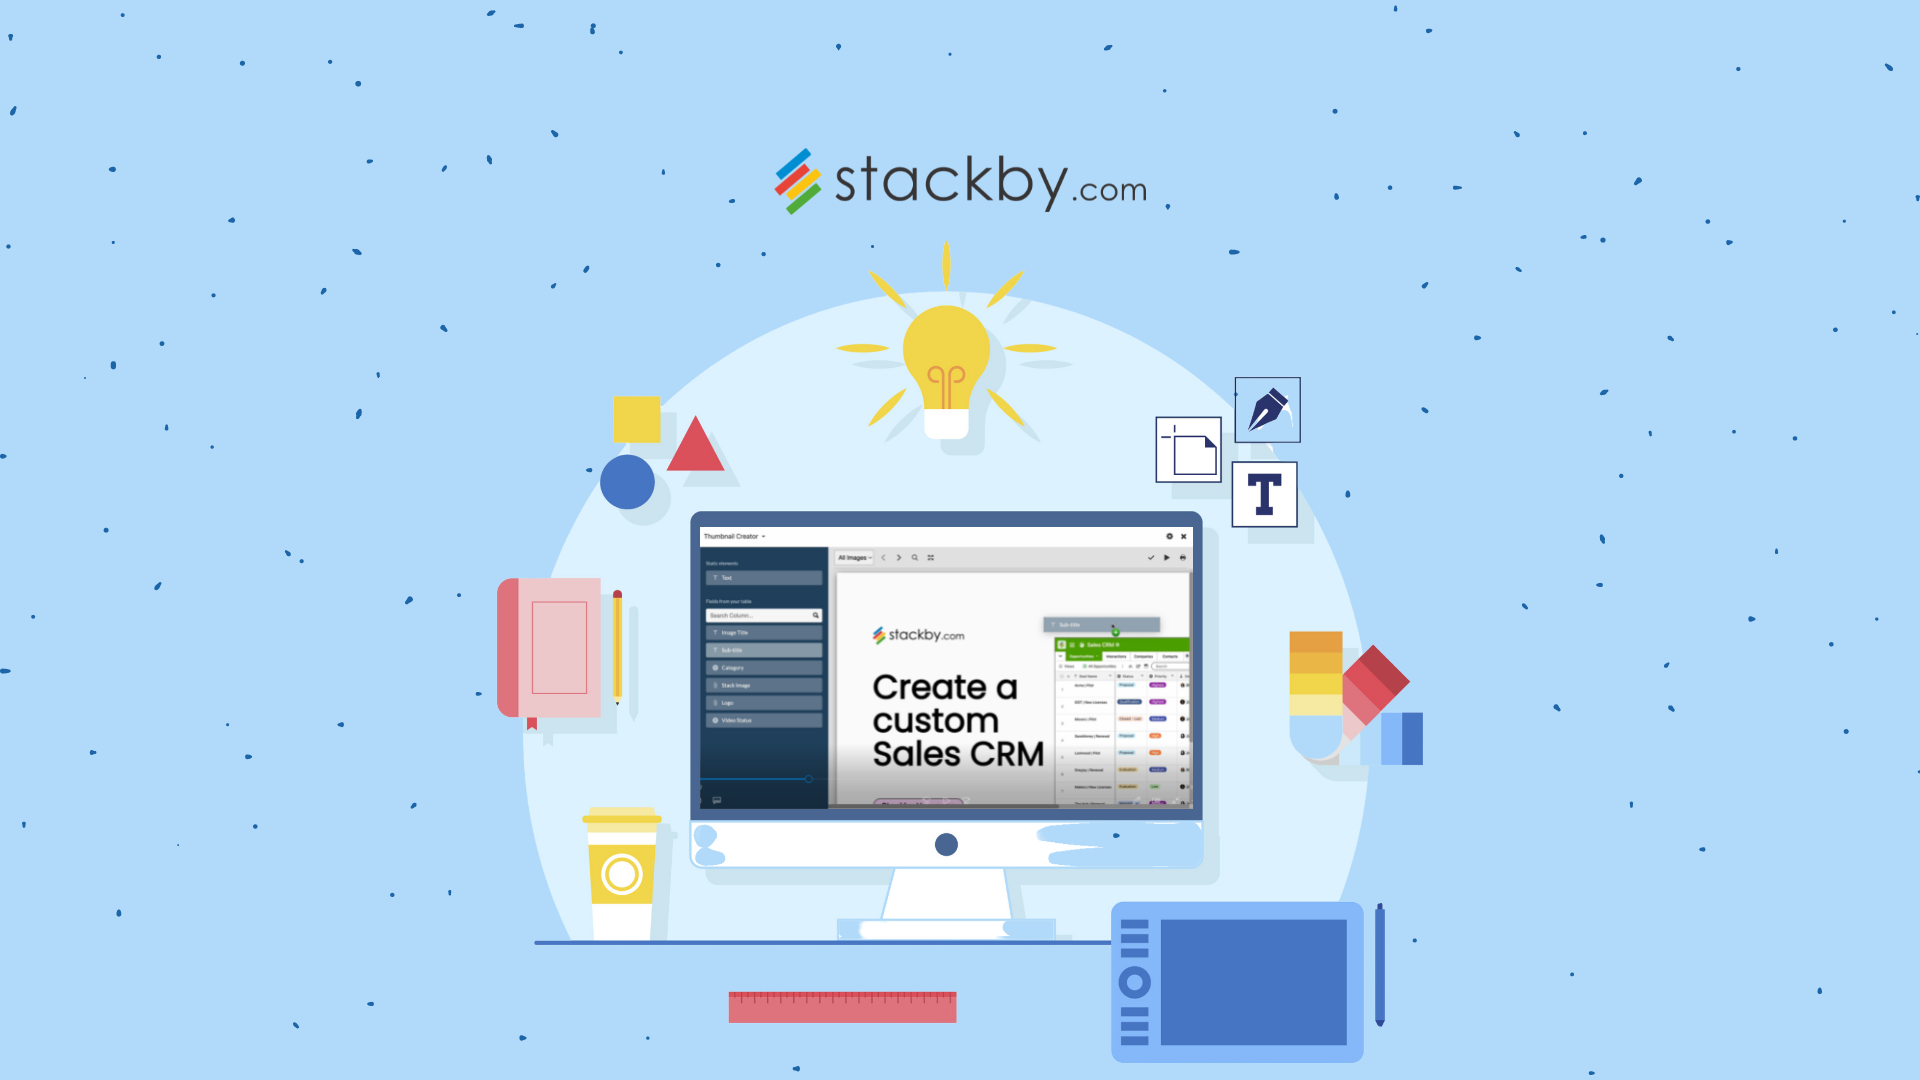 Introducing Page Designer in Stackby